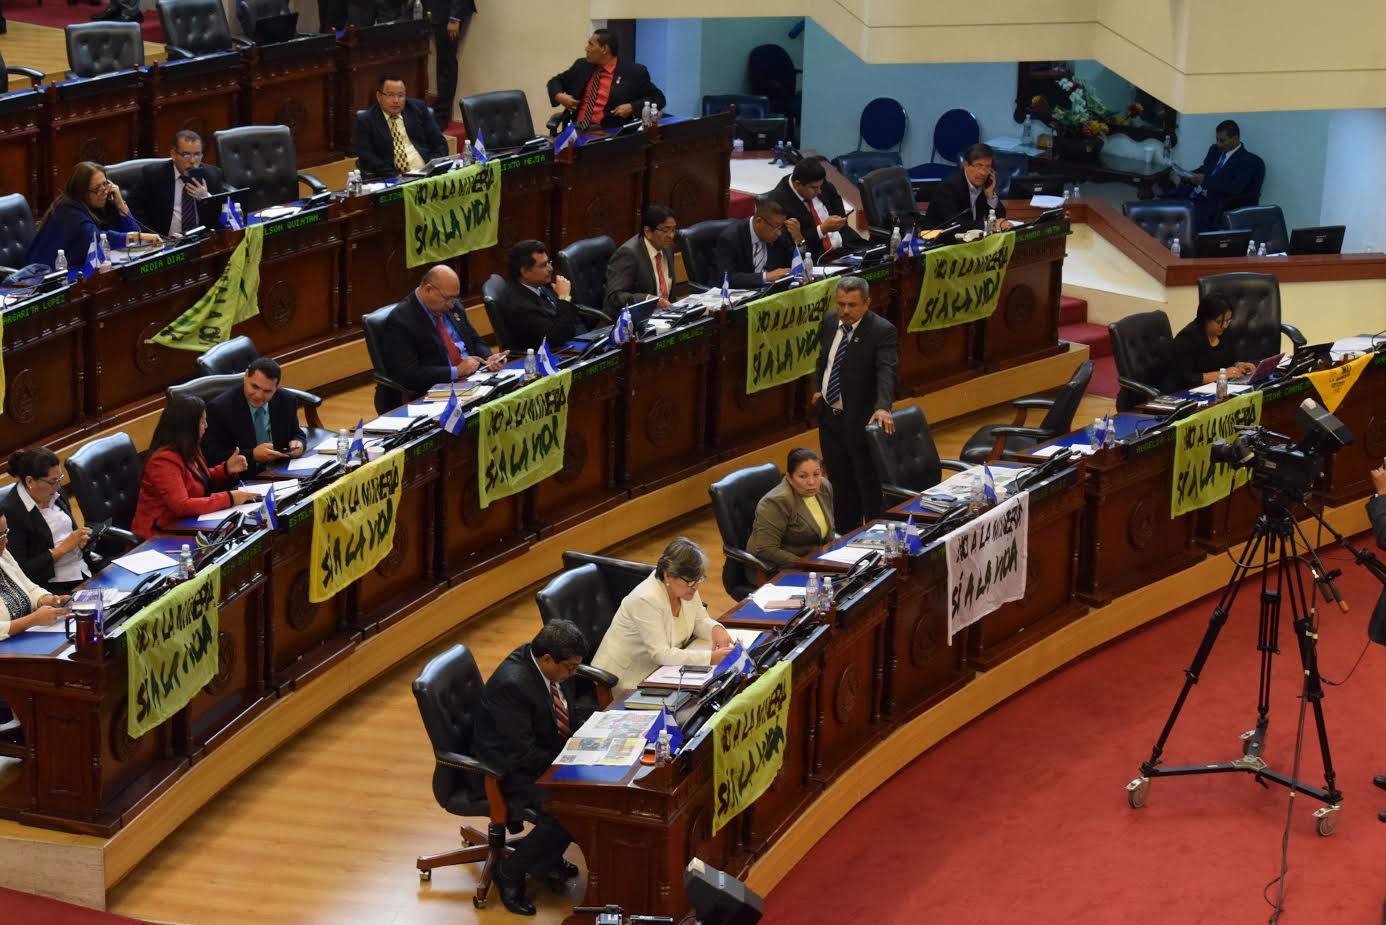 Members of El Salvador’s Legislative Assembly display banners reading “No to mining, yes to life” as they prepare to vote on a historic mining ban. Photo: Genia Yatsenko.